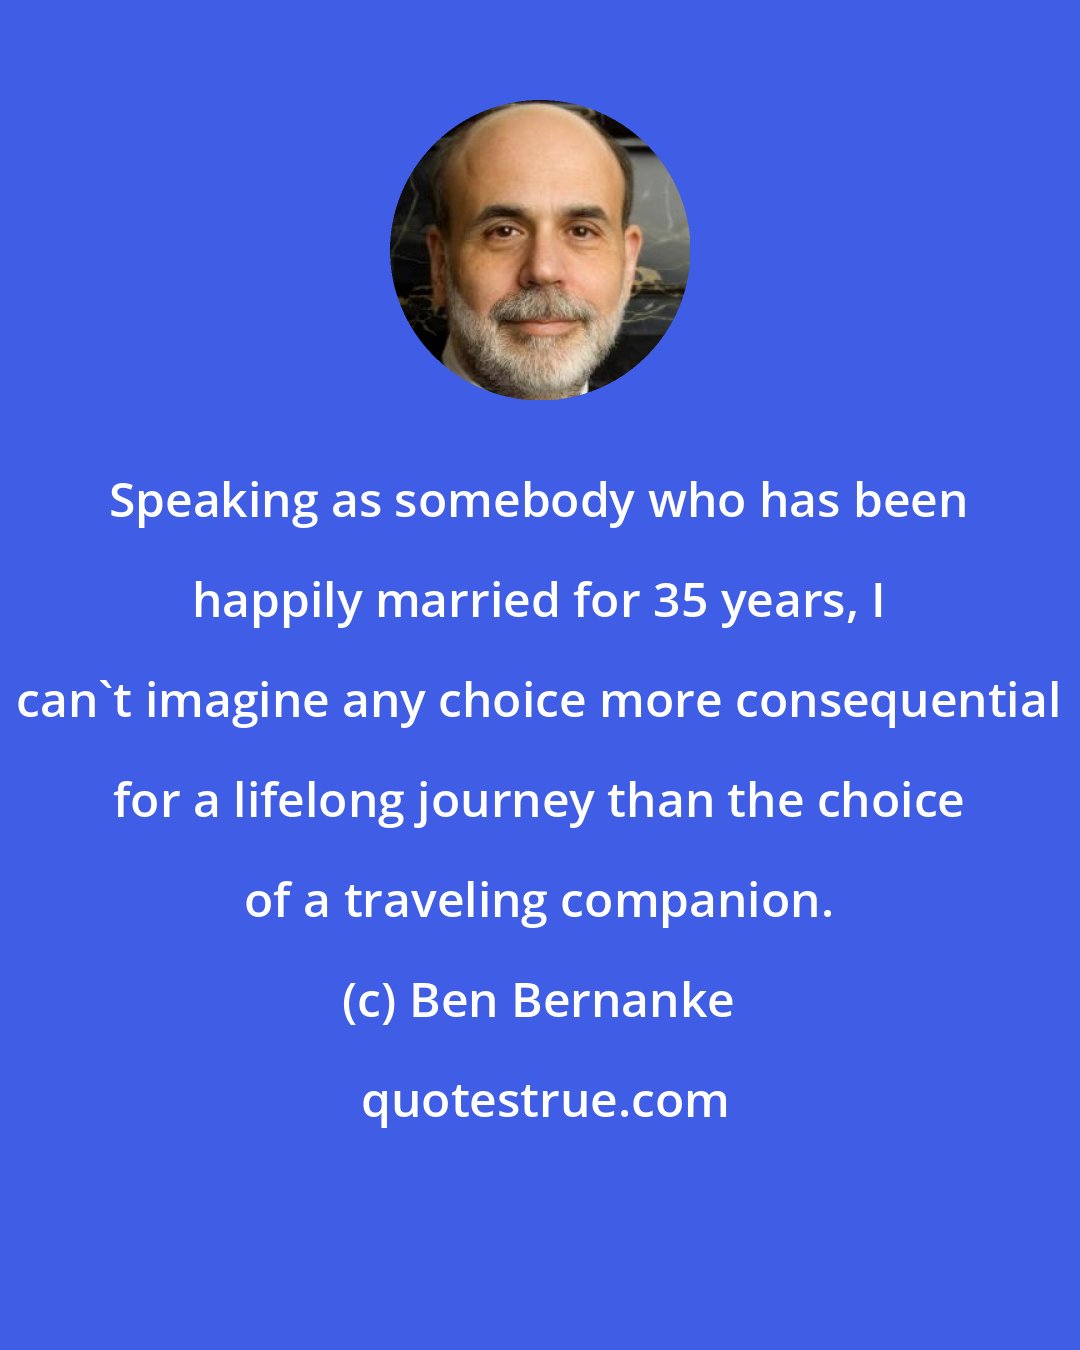 Ben Bernanke: Speaking as somebody who has been happily married for 35 years, I can't imagine any choice more consequential for a lifelong journey than the choice of a traveling companion.